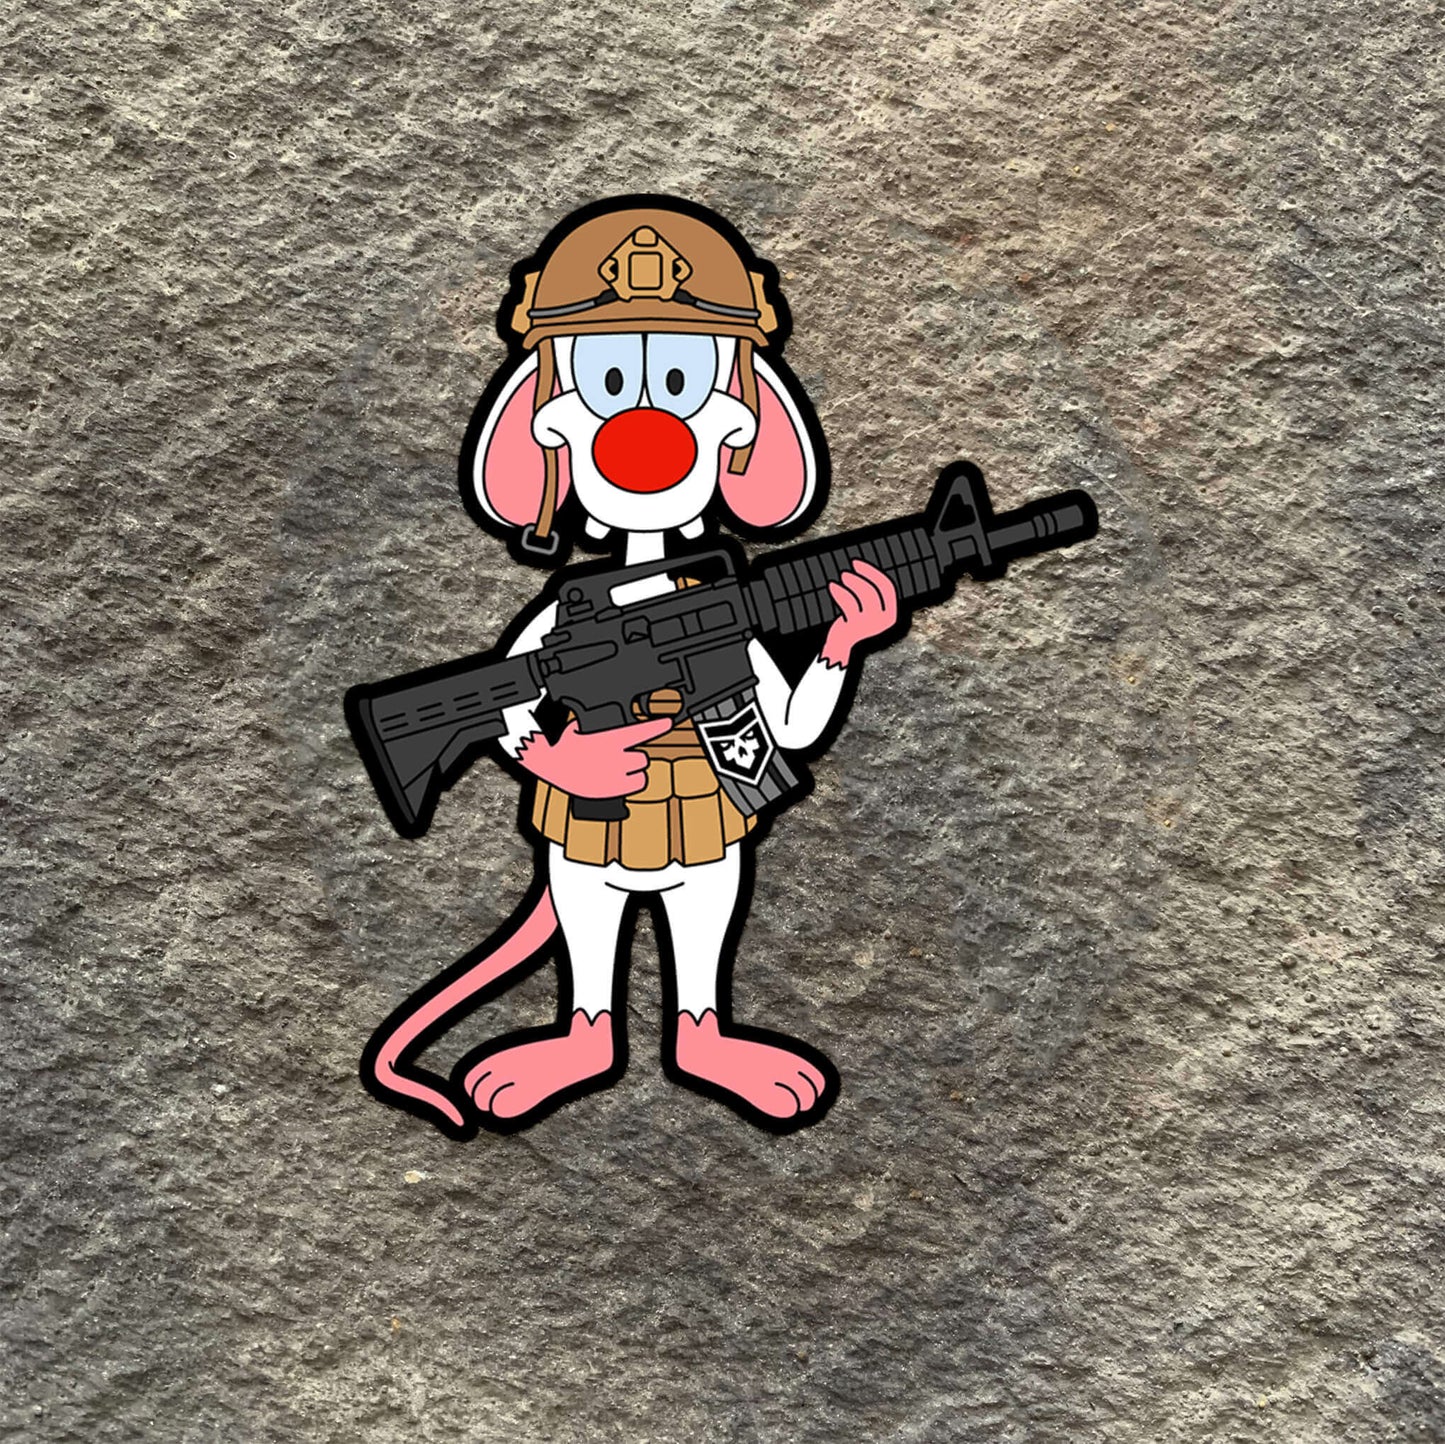 2A Pinky & The Brain Decal